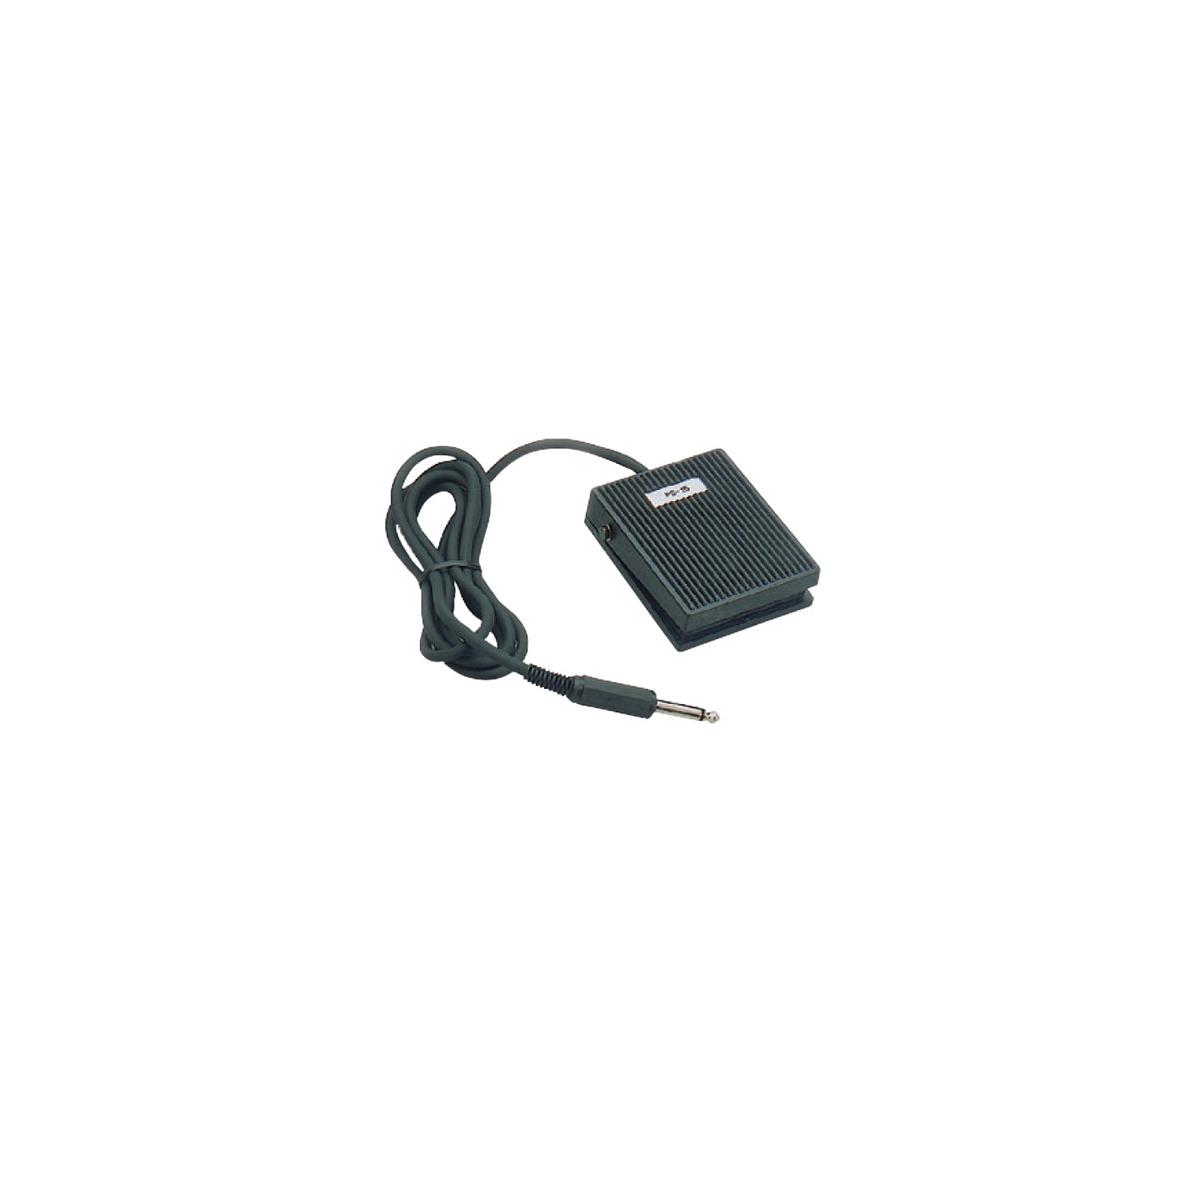 Image of Quik Lok Rubberized Foot Pedal with Open/Closed Contacts